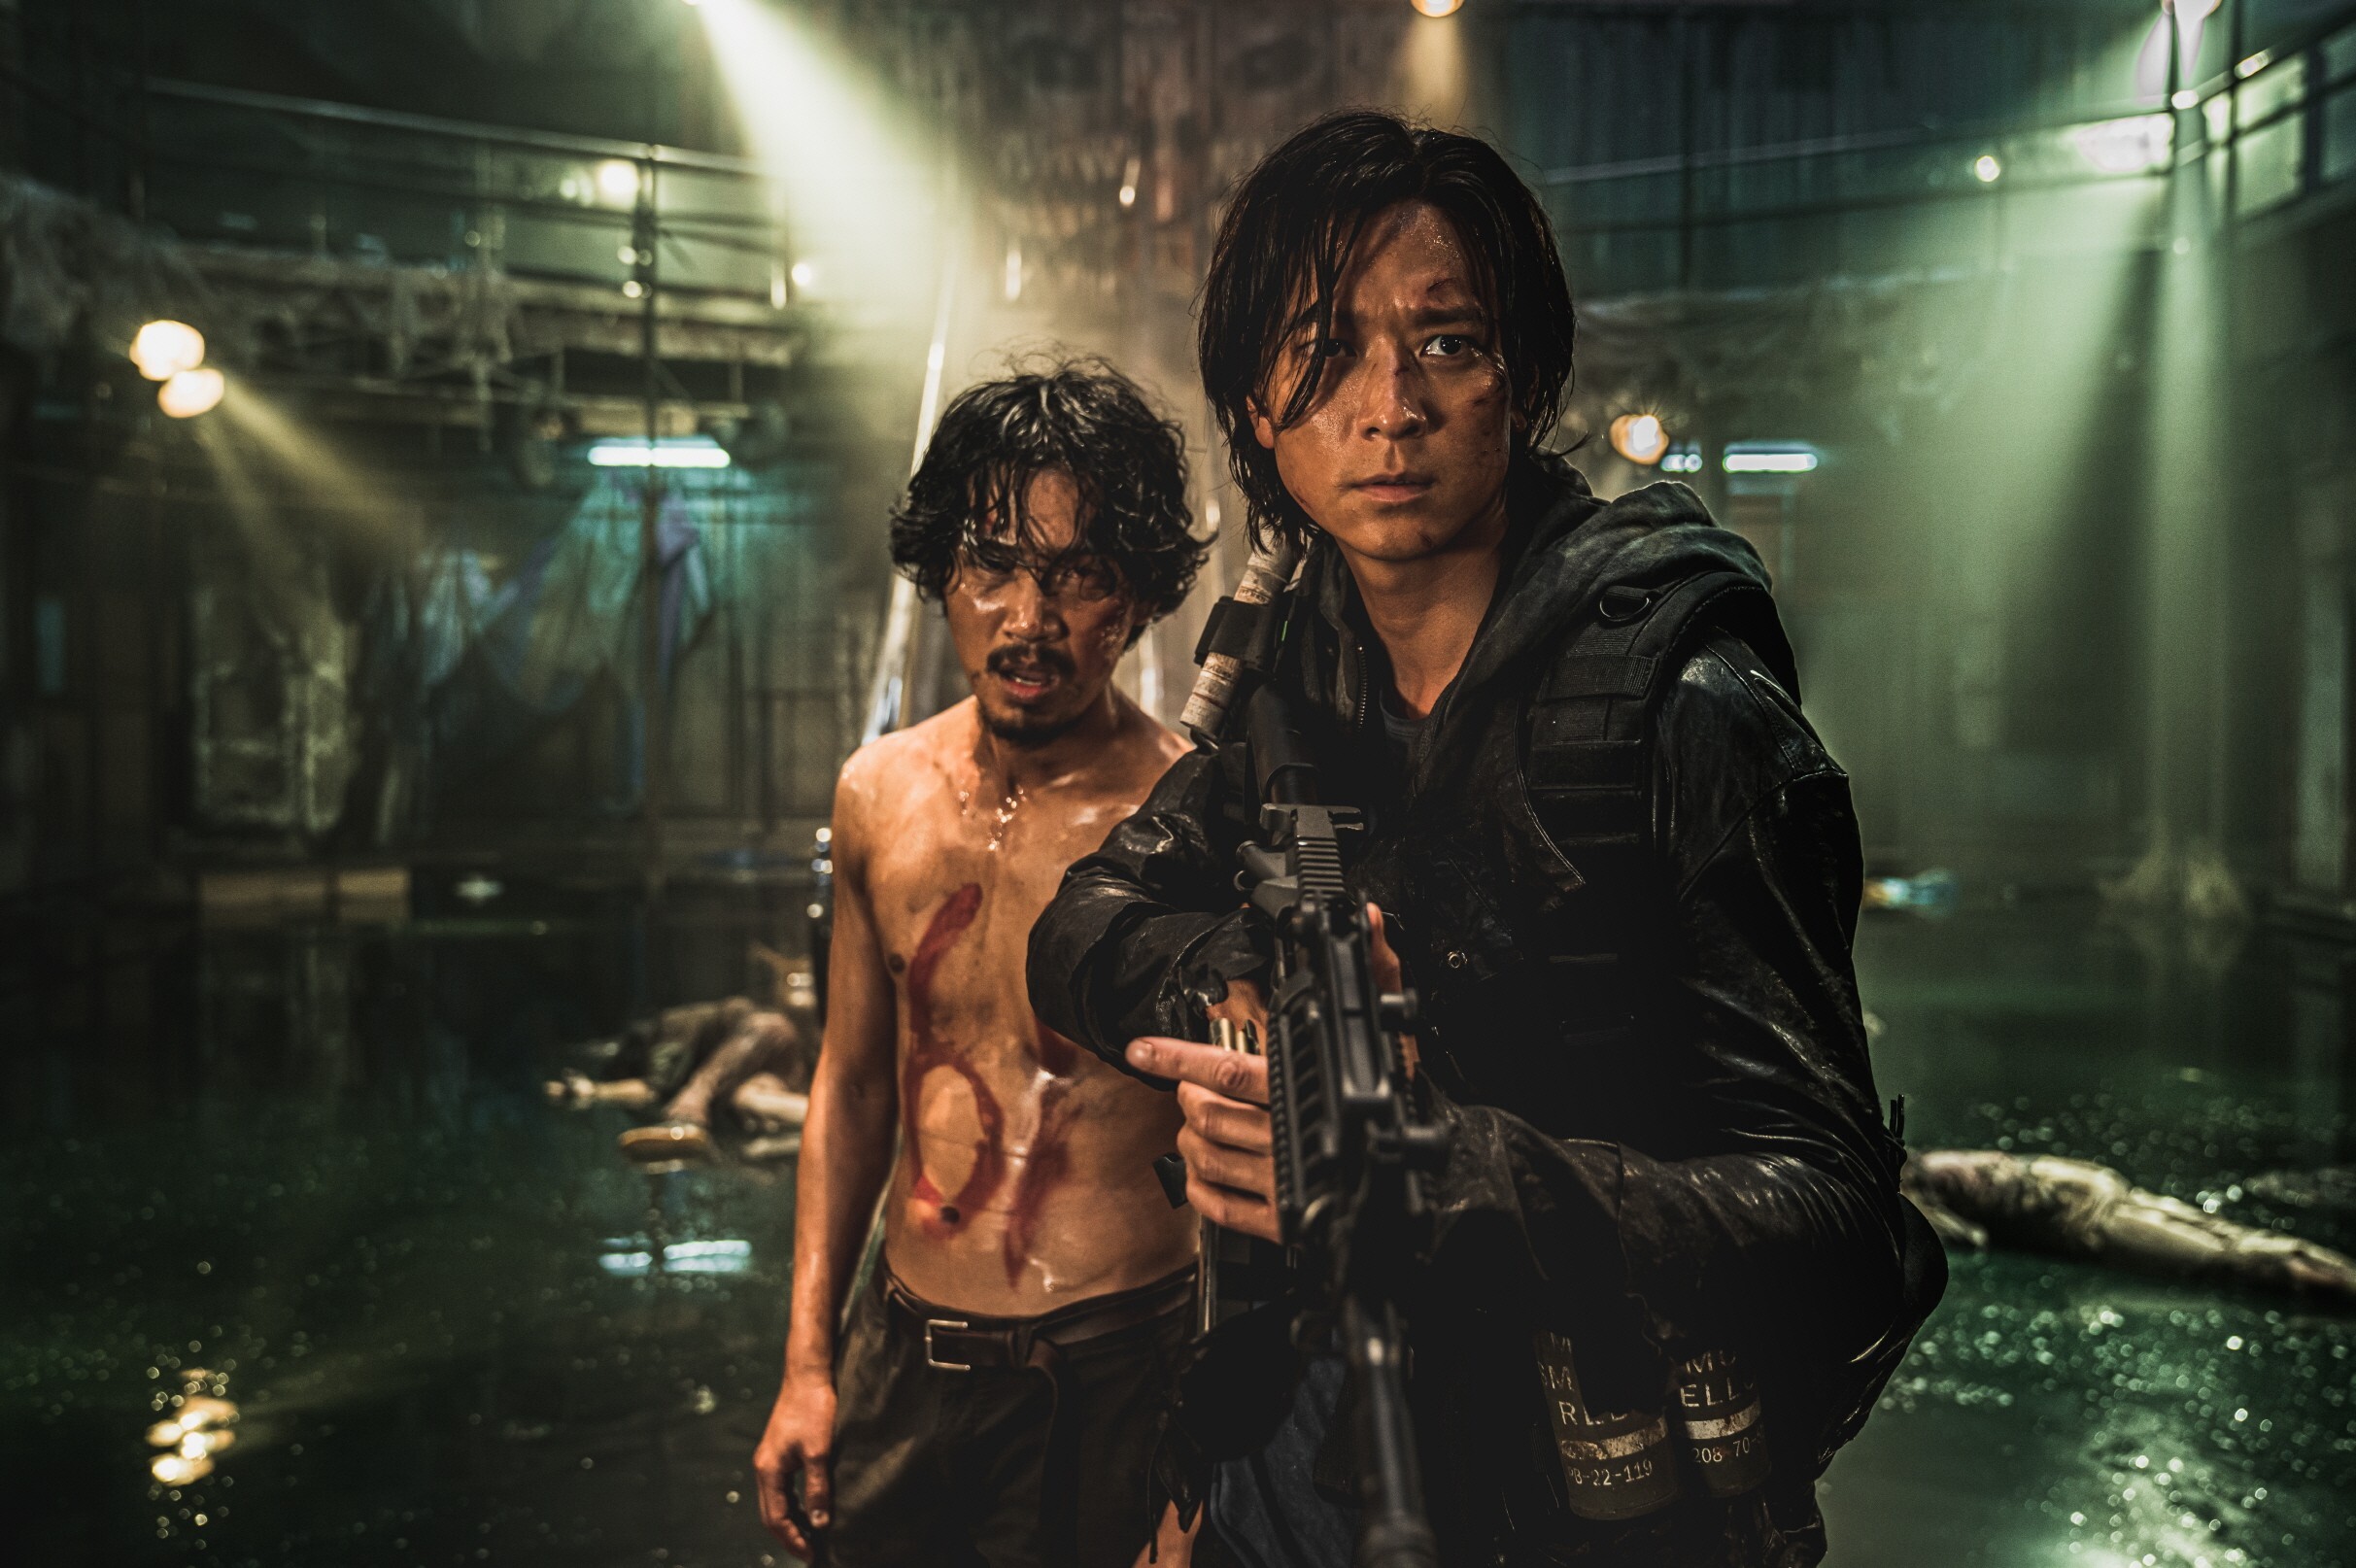 Peninsula movie review: Train to Busan meets Mad Max and Escape from New York in disappointing zombie sequel | South China Morning Post